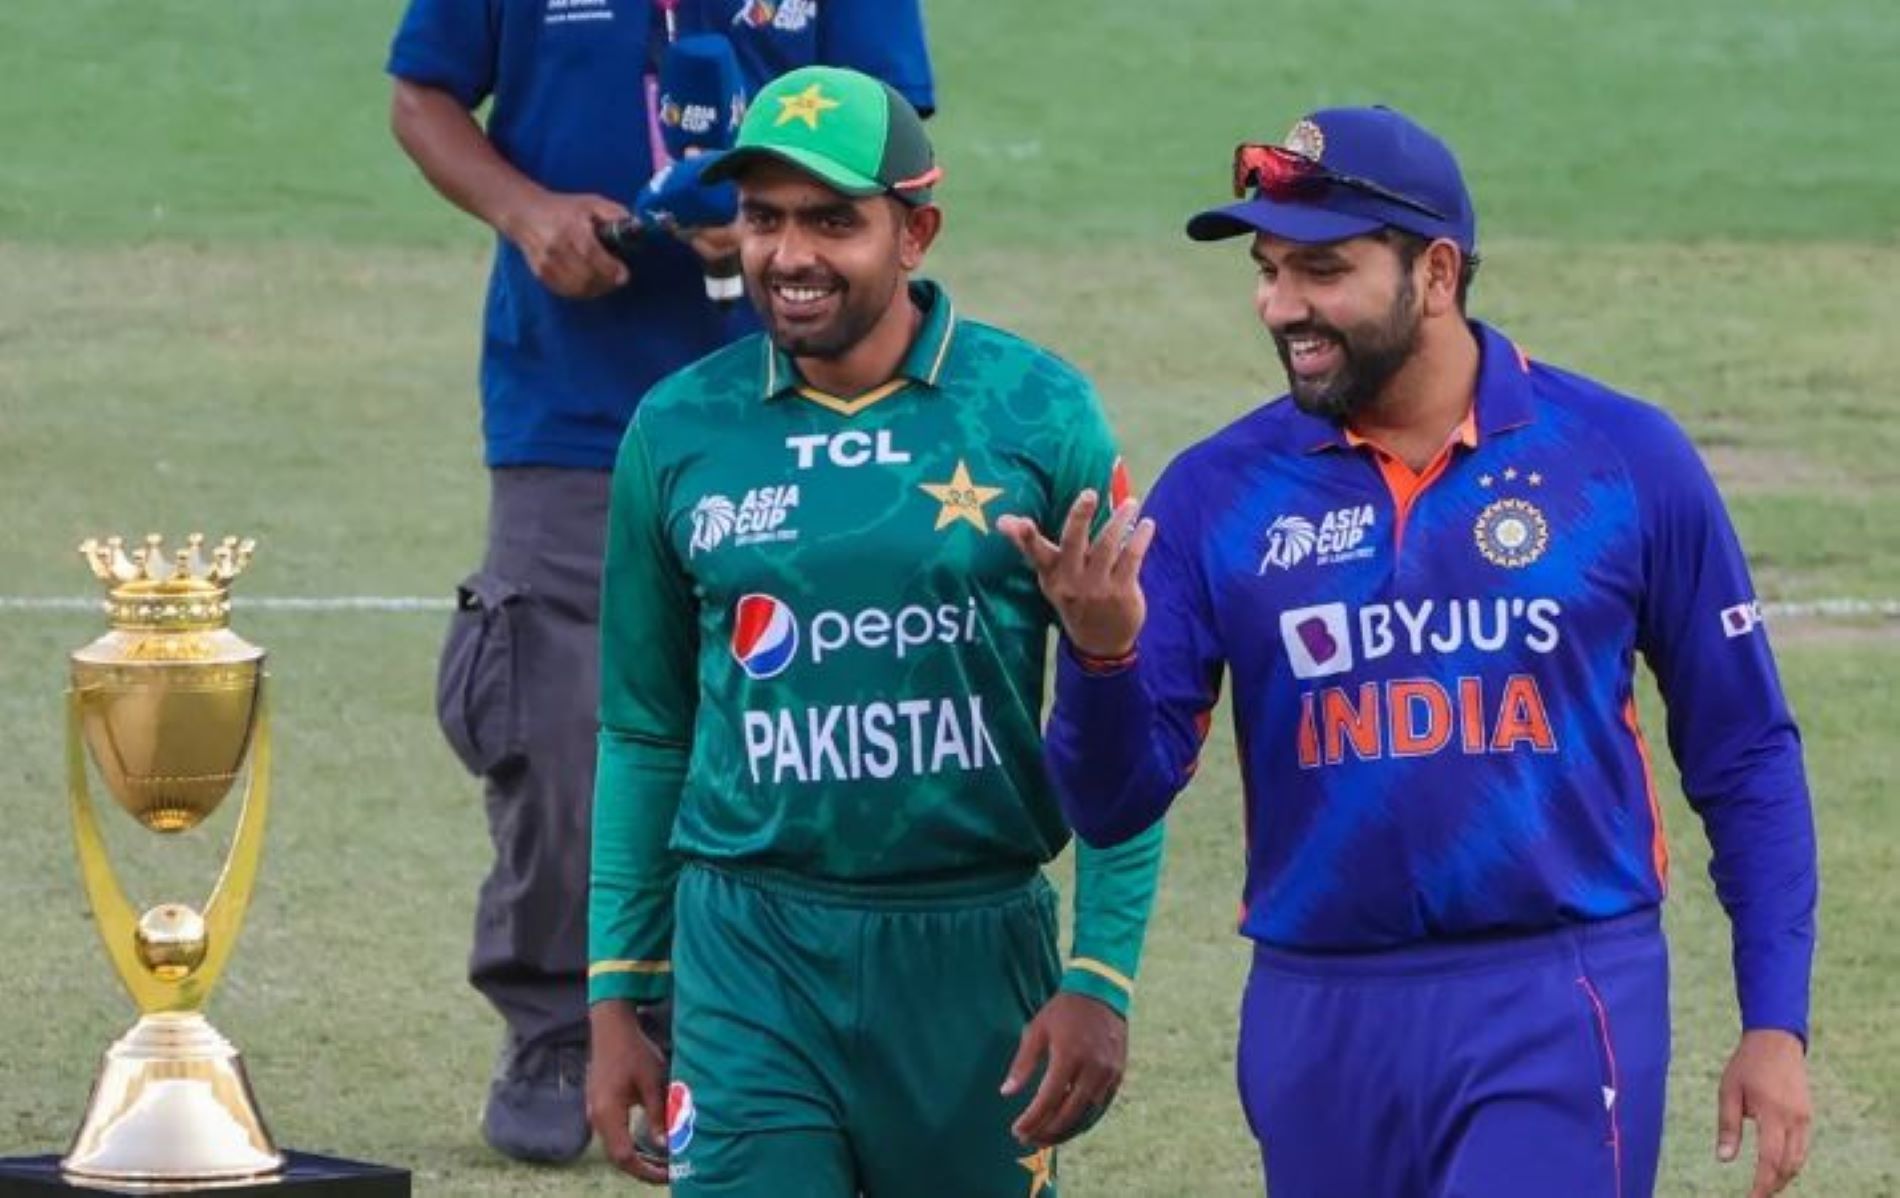 India and Pakistan once again missed out facing each other in an Asia Cup final